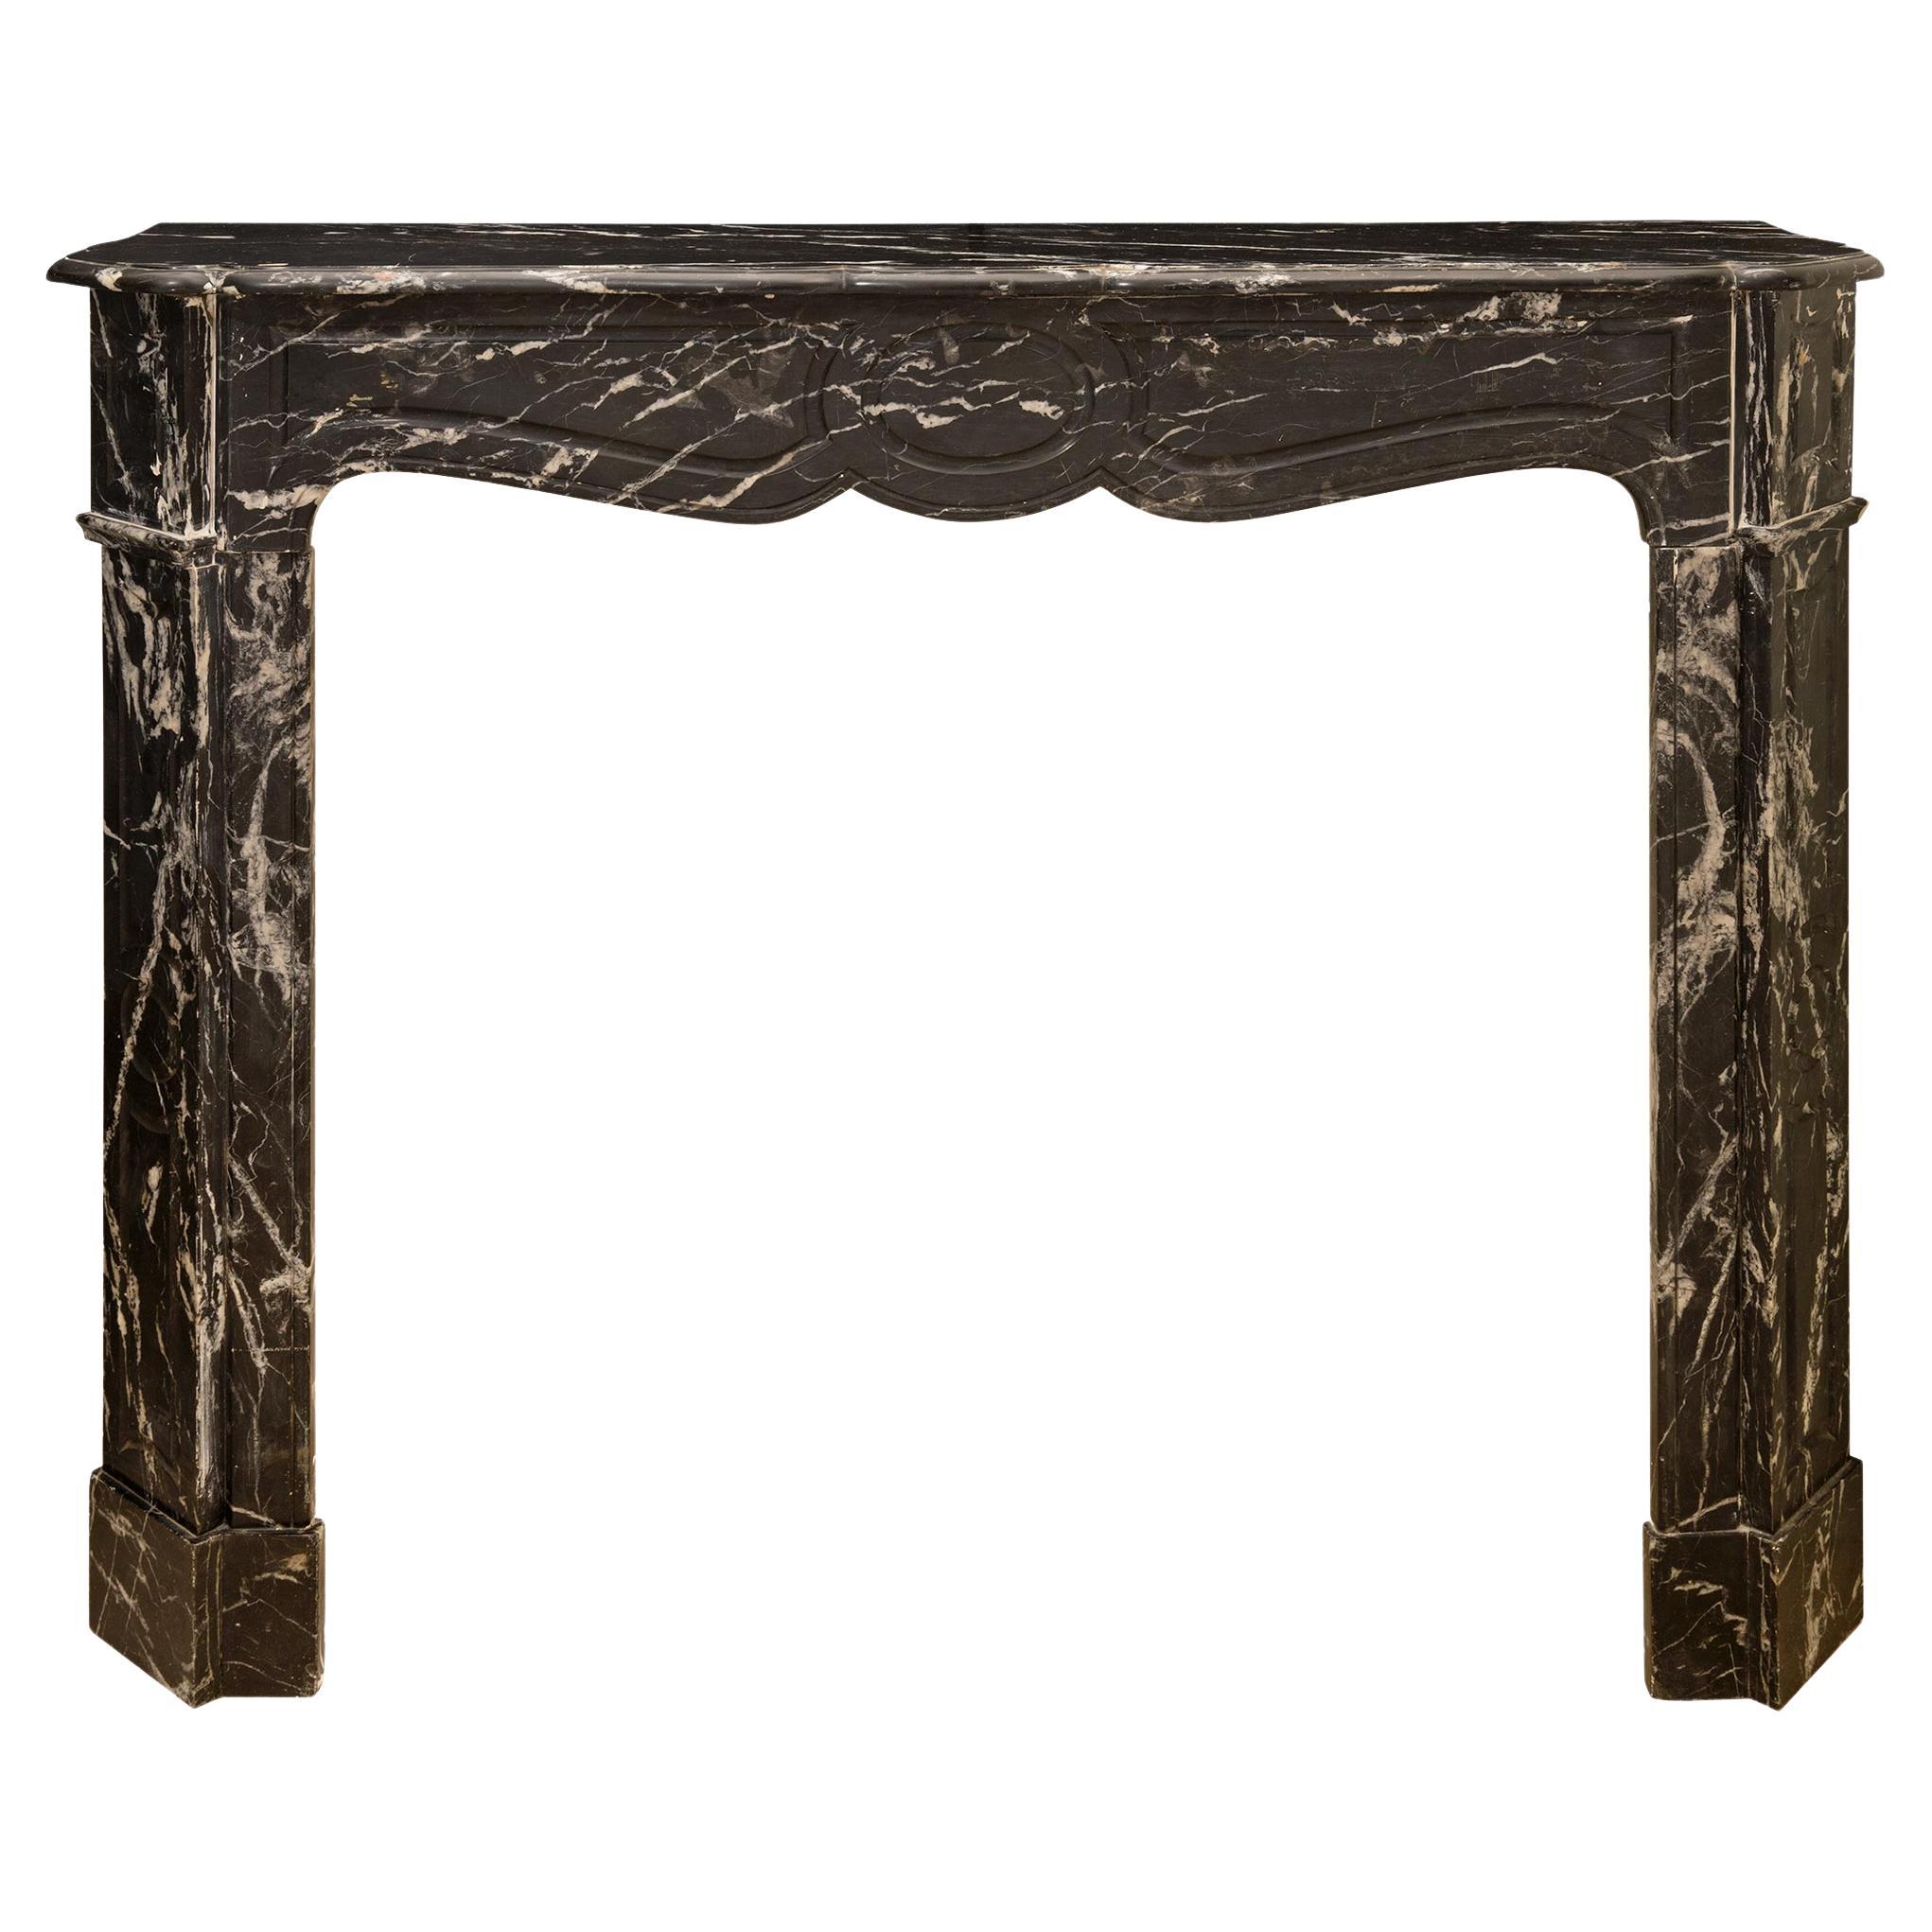 French 19th Century Louis XV Style Noir Antique Marble Fireplace Mantel For Sale